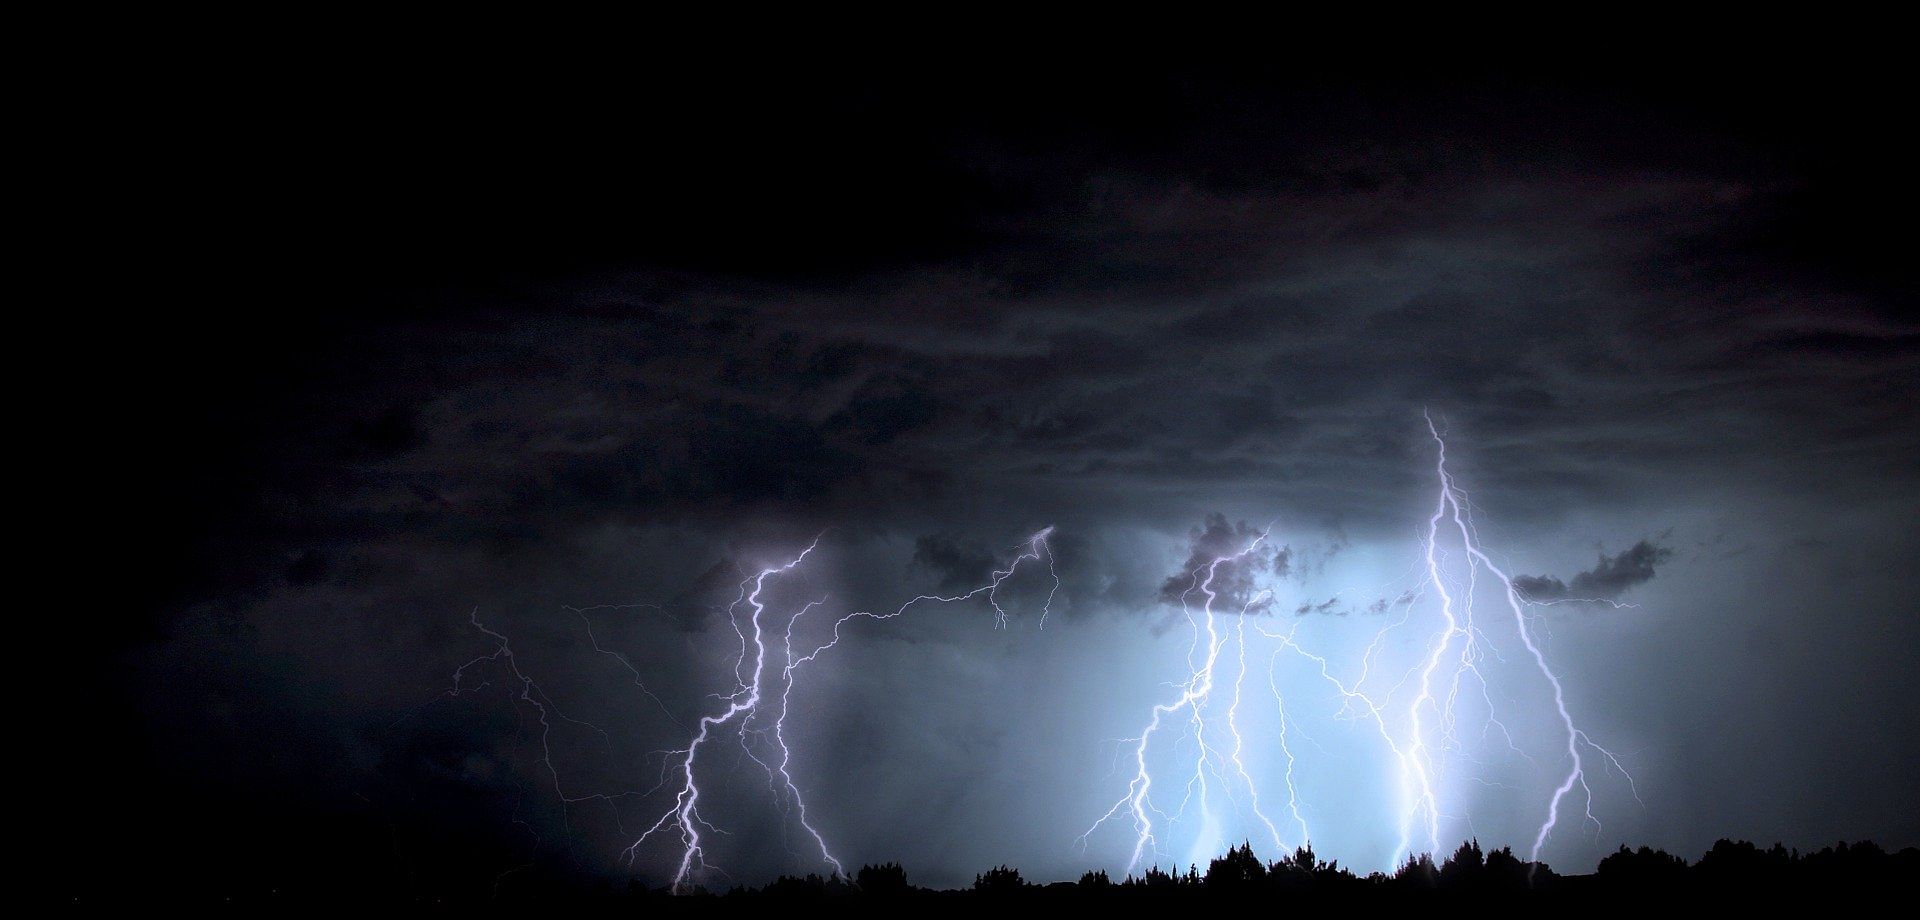 Lightning struck the Dhok Gumsar area in Surankote tehsil early Tuesday resulting in the death of two person. Representative image/Credit: Pixabay Image